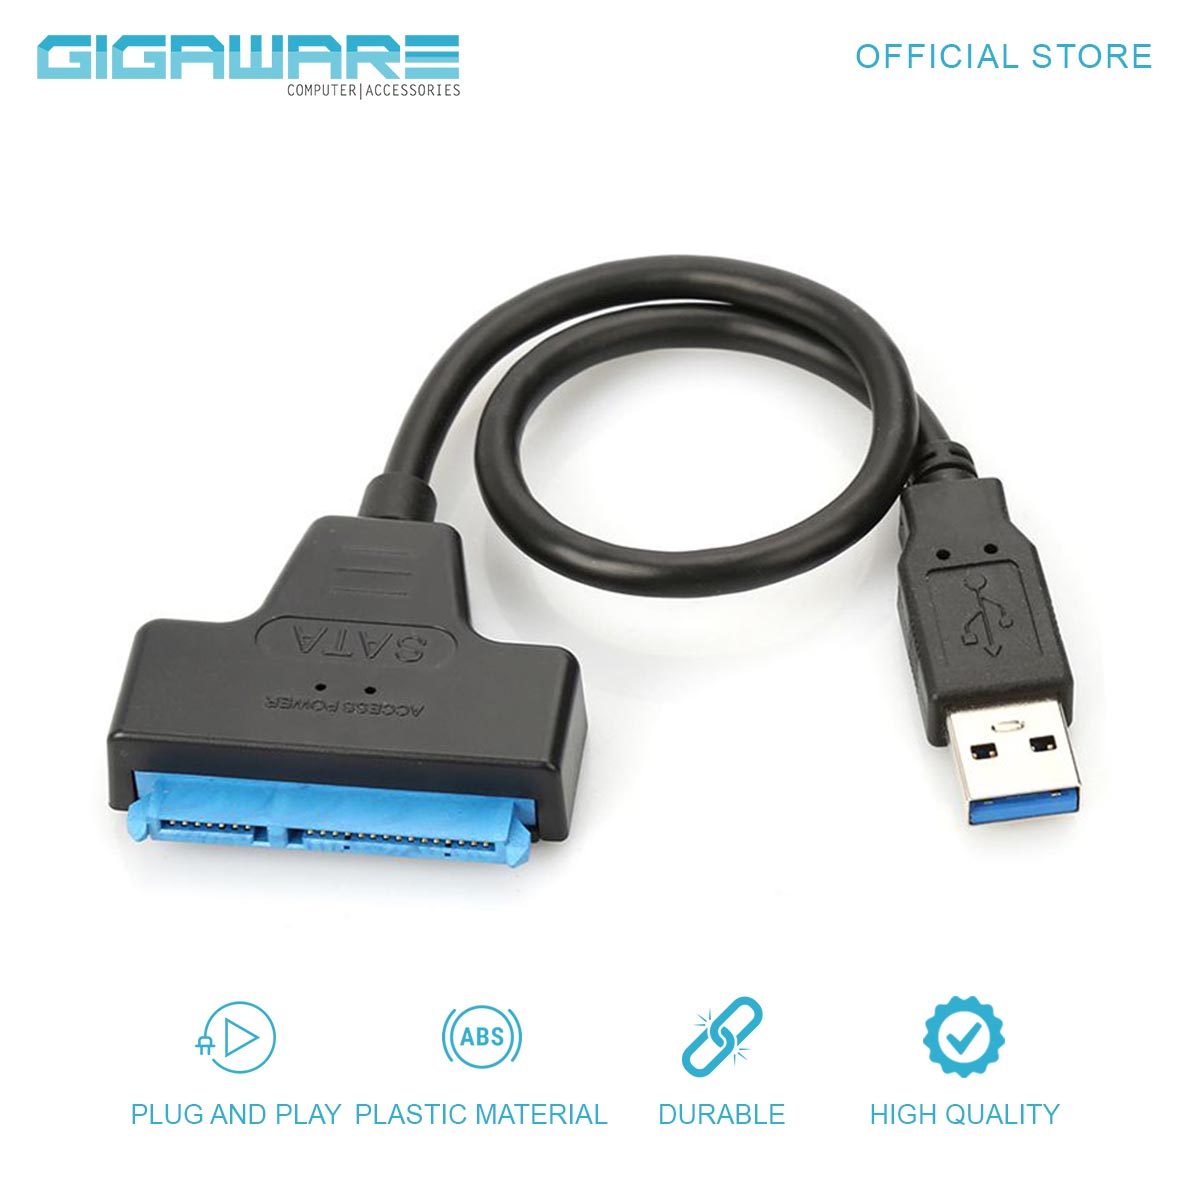 gigaware usb to serial driver windows 8.1